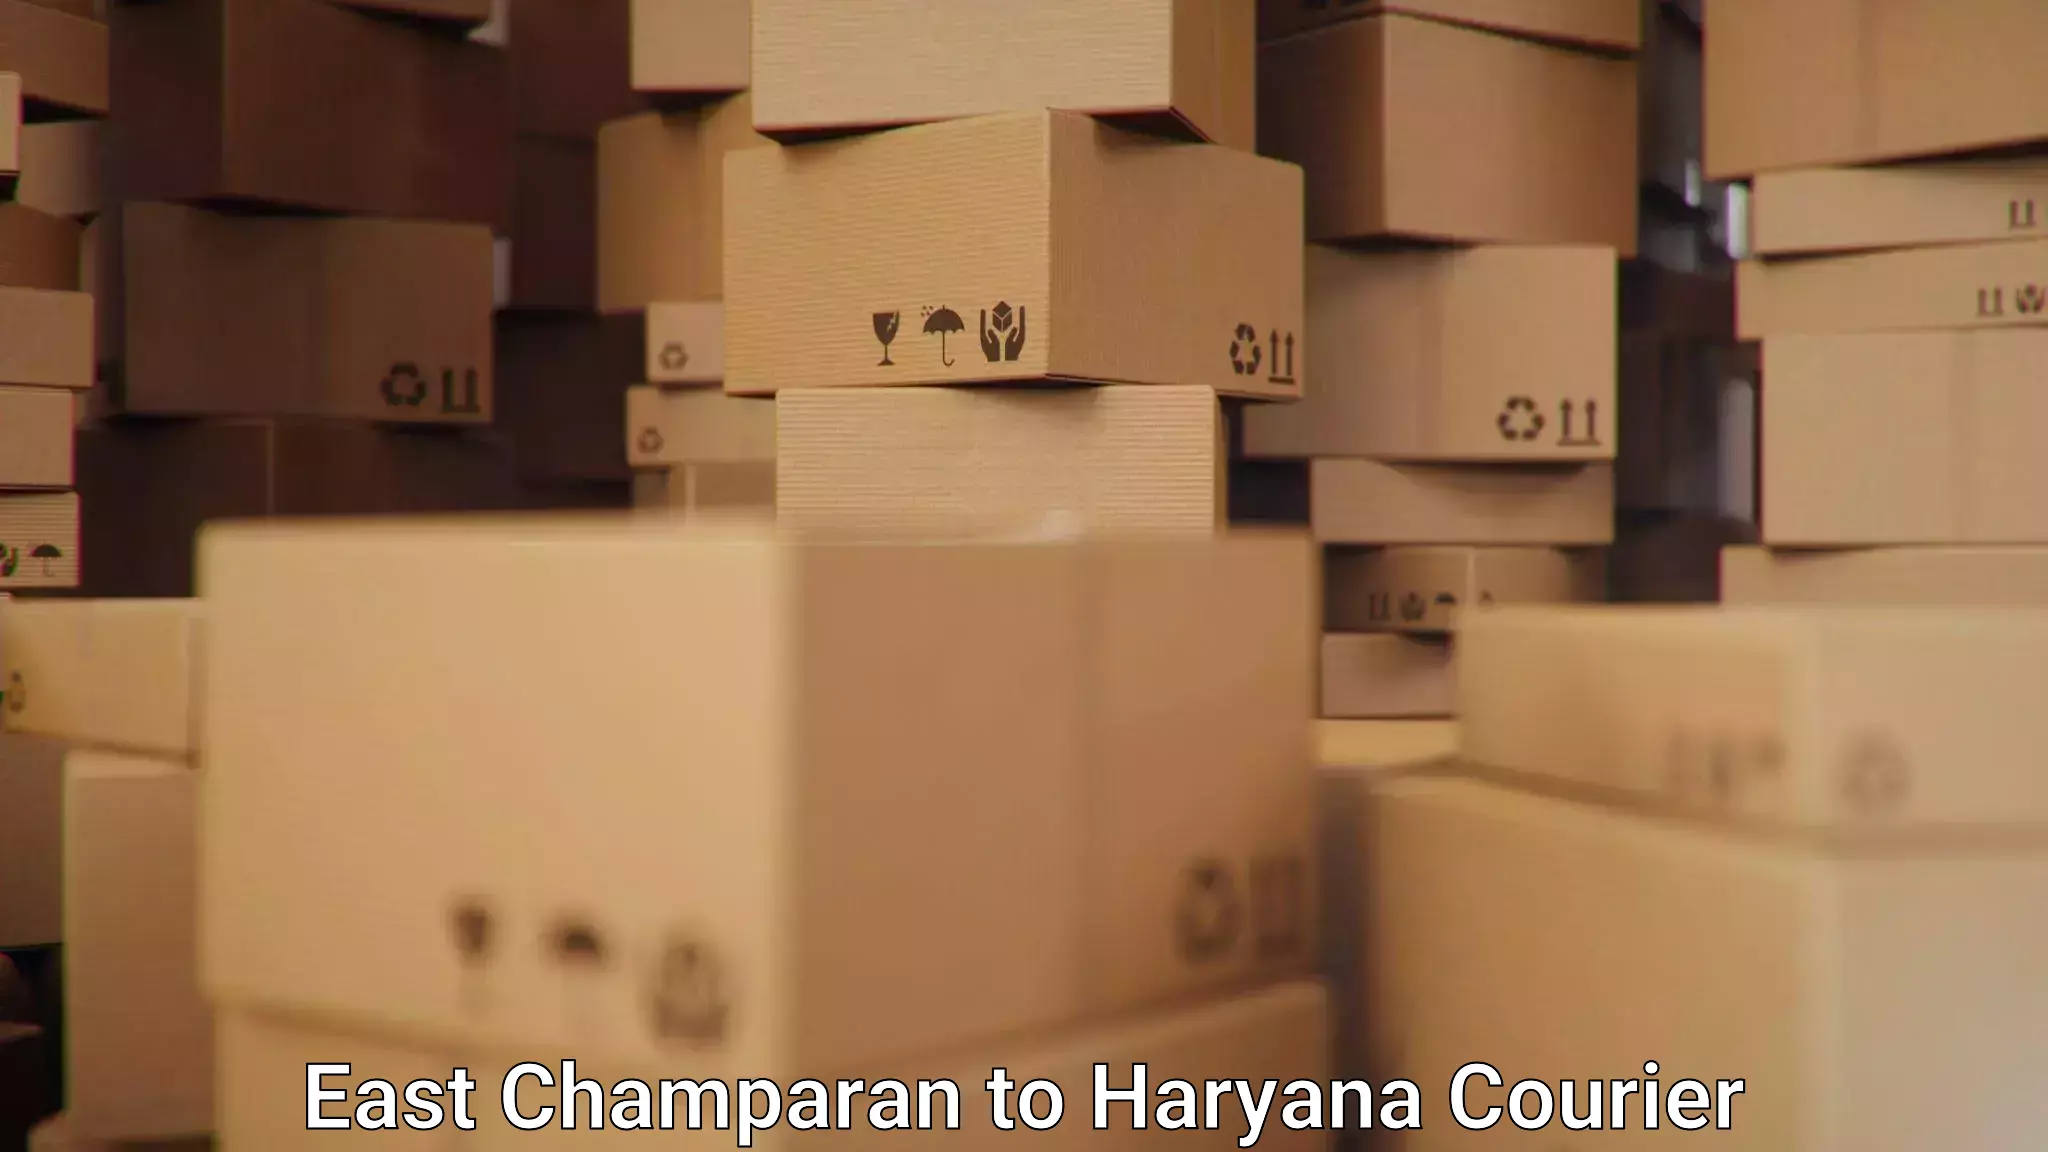 Global shipping solutions East Champaran to NCR Haryana